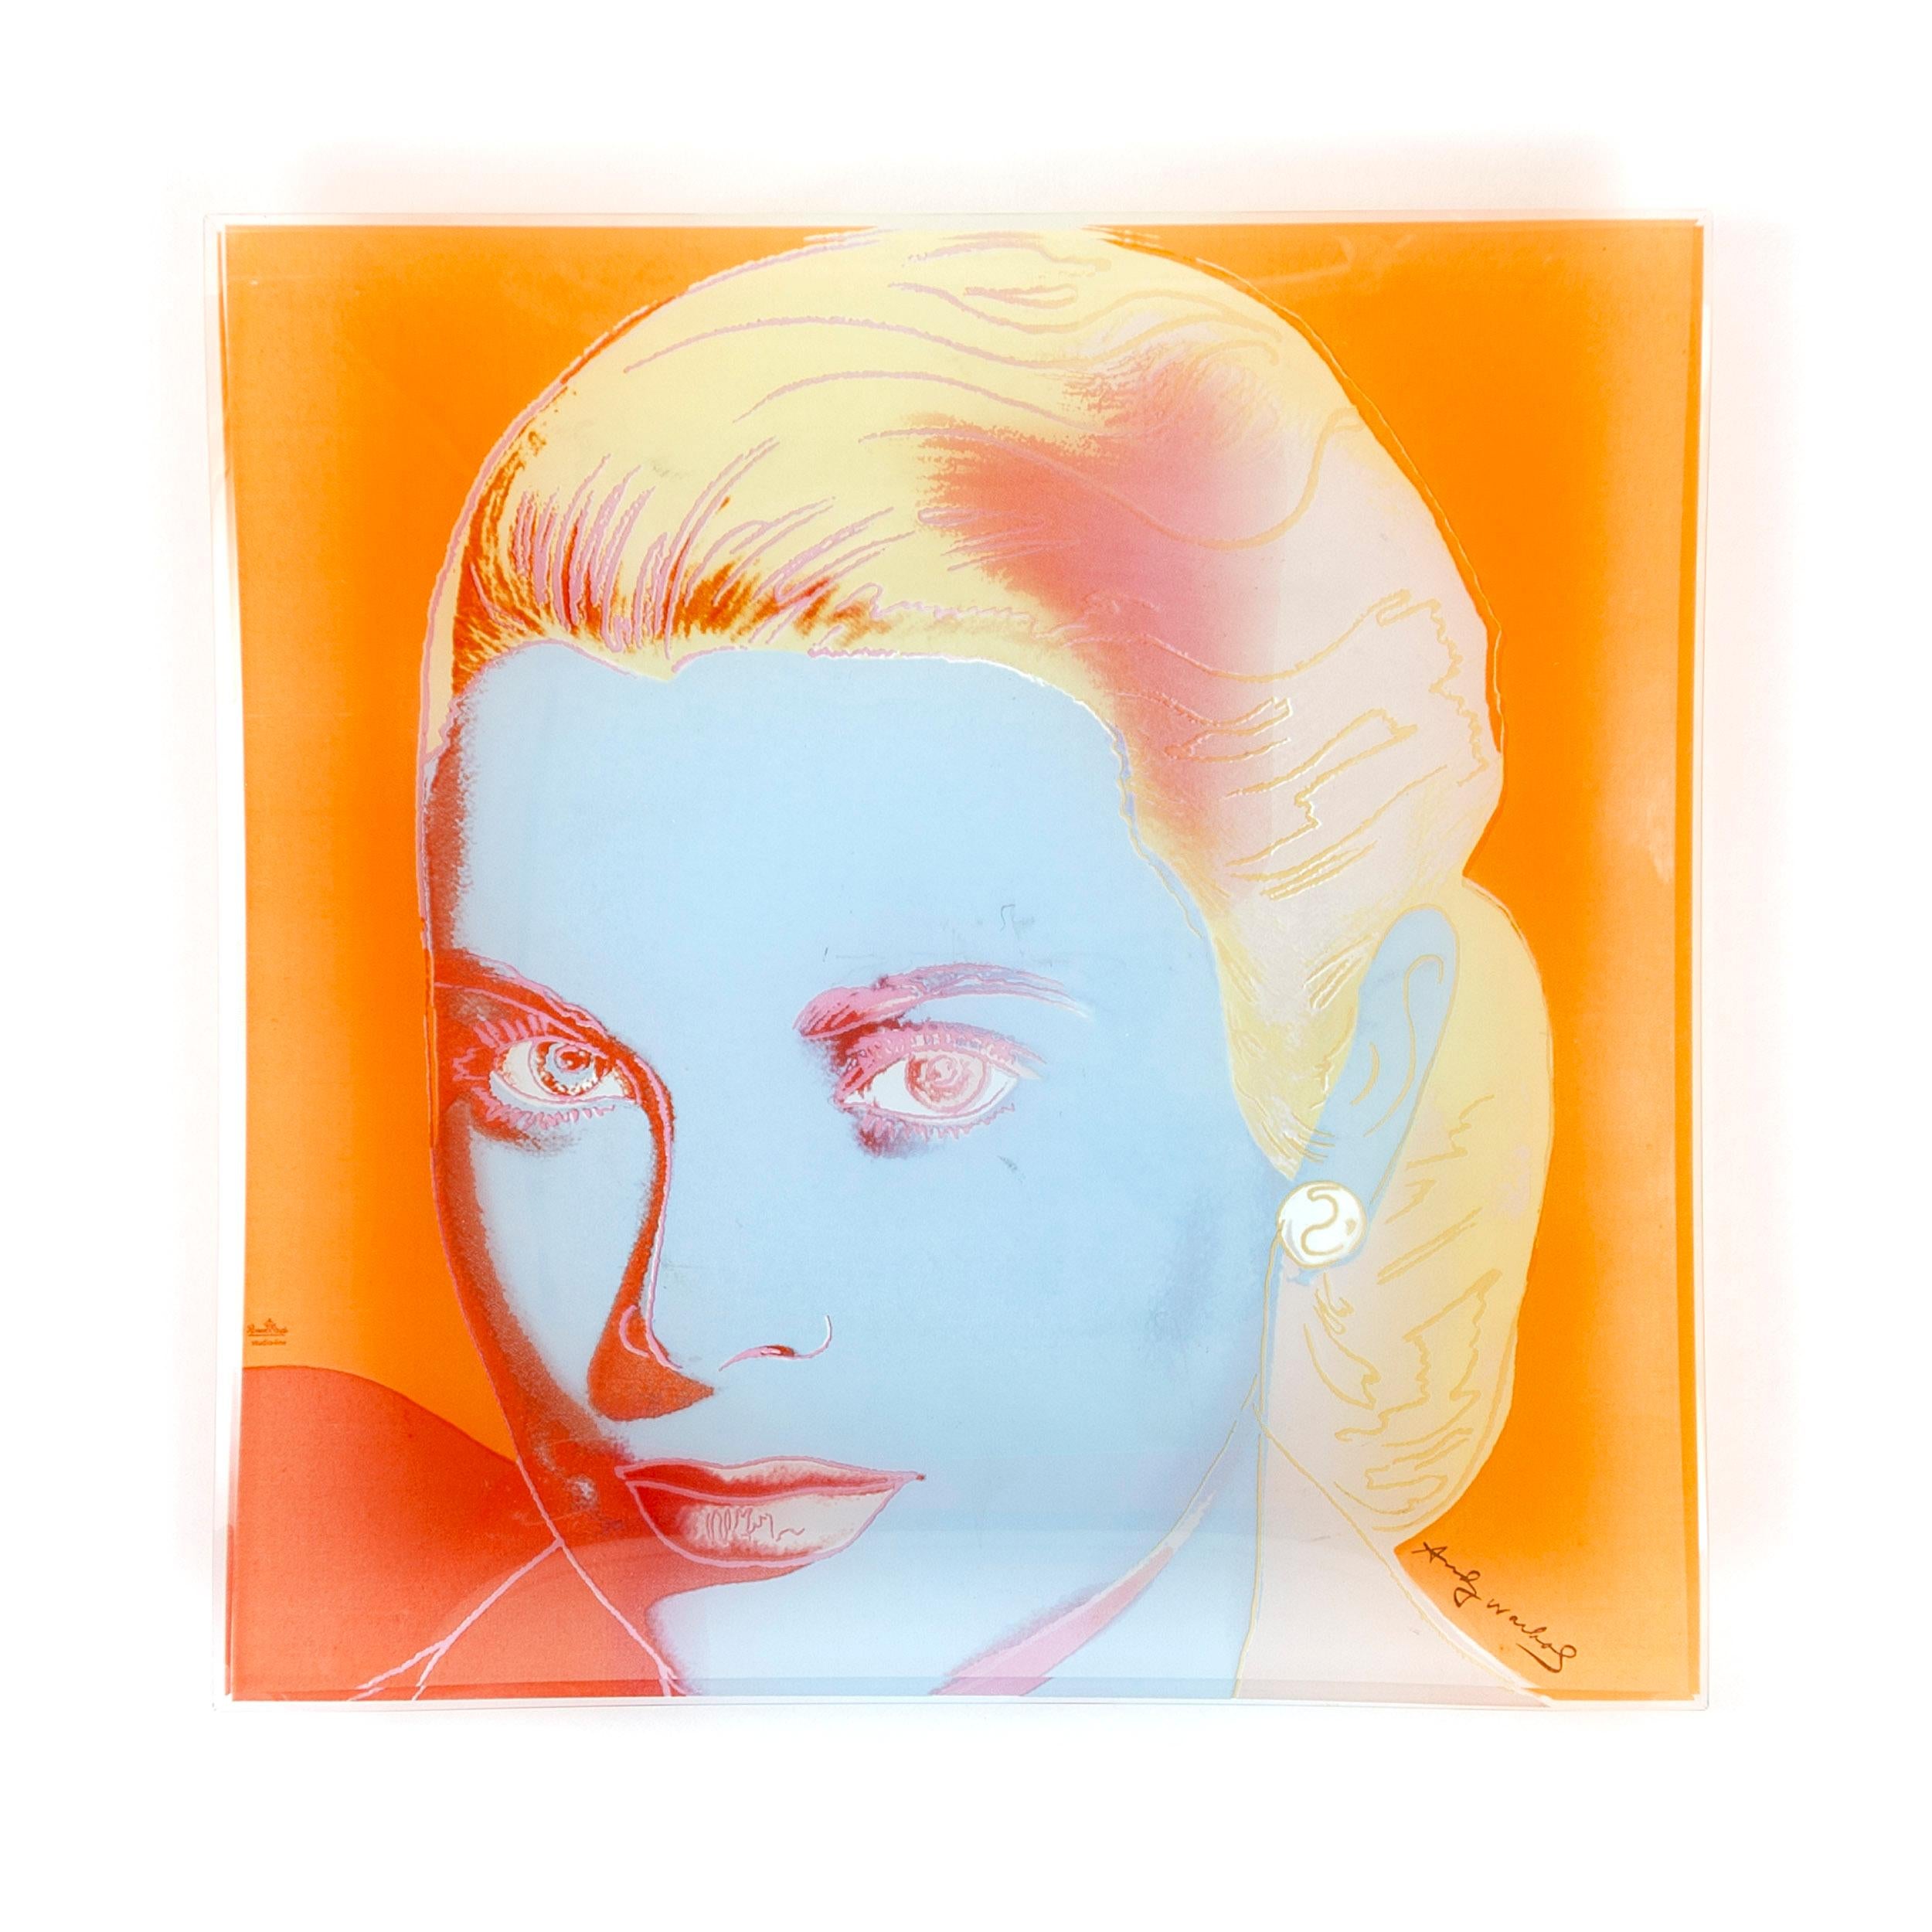 An Andy Warhol silkscreen on Rosenthal studio glass featuring the portrait of Grace Kelly.